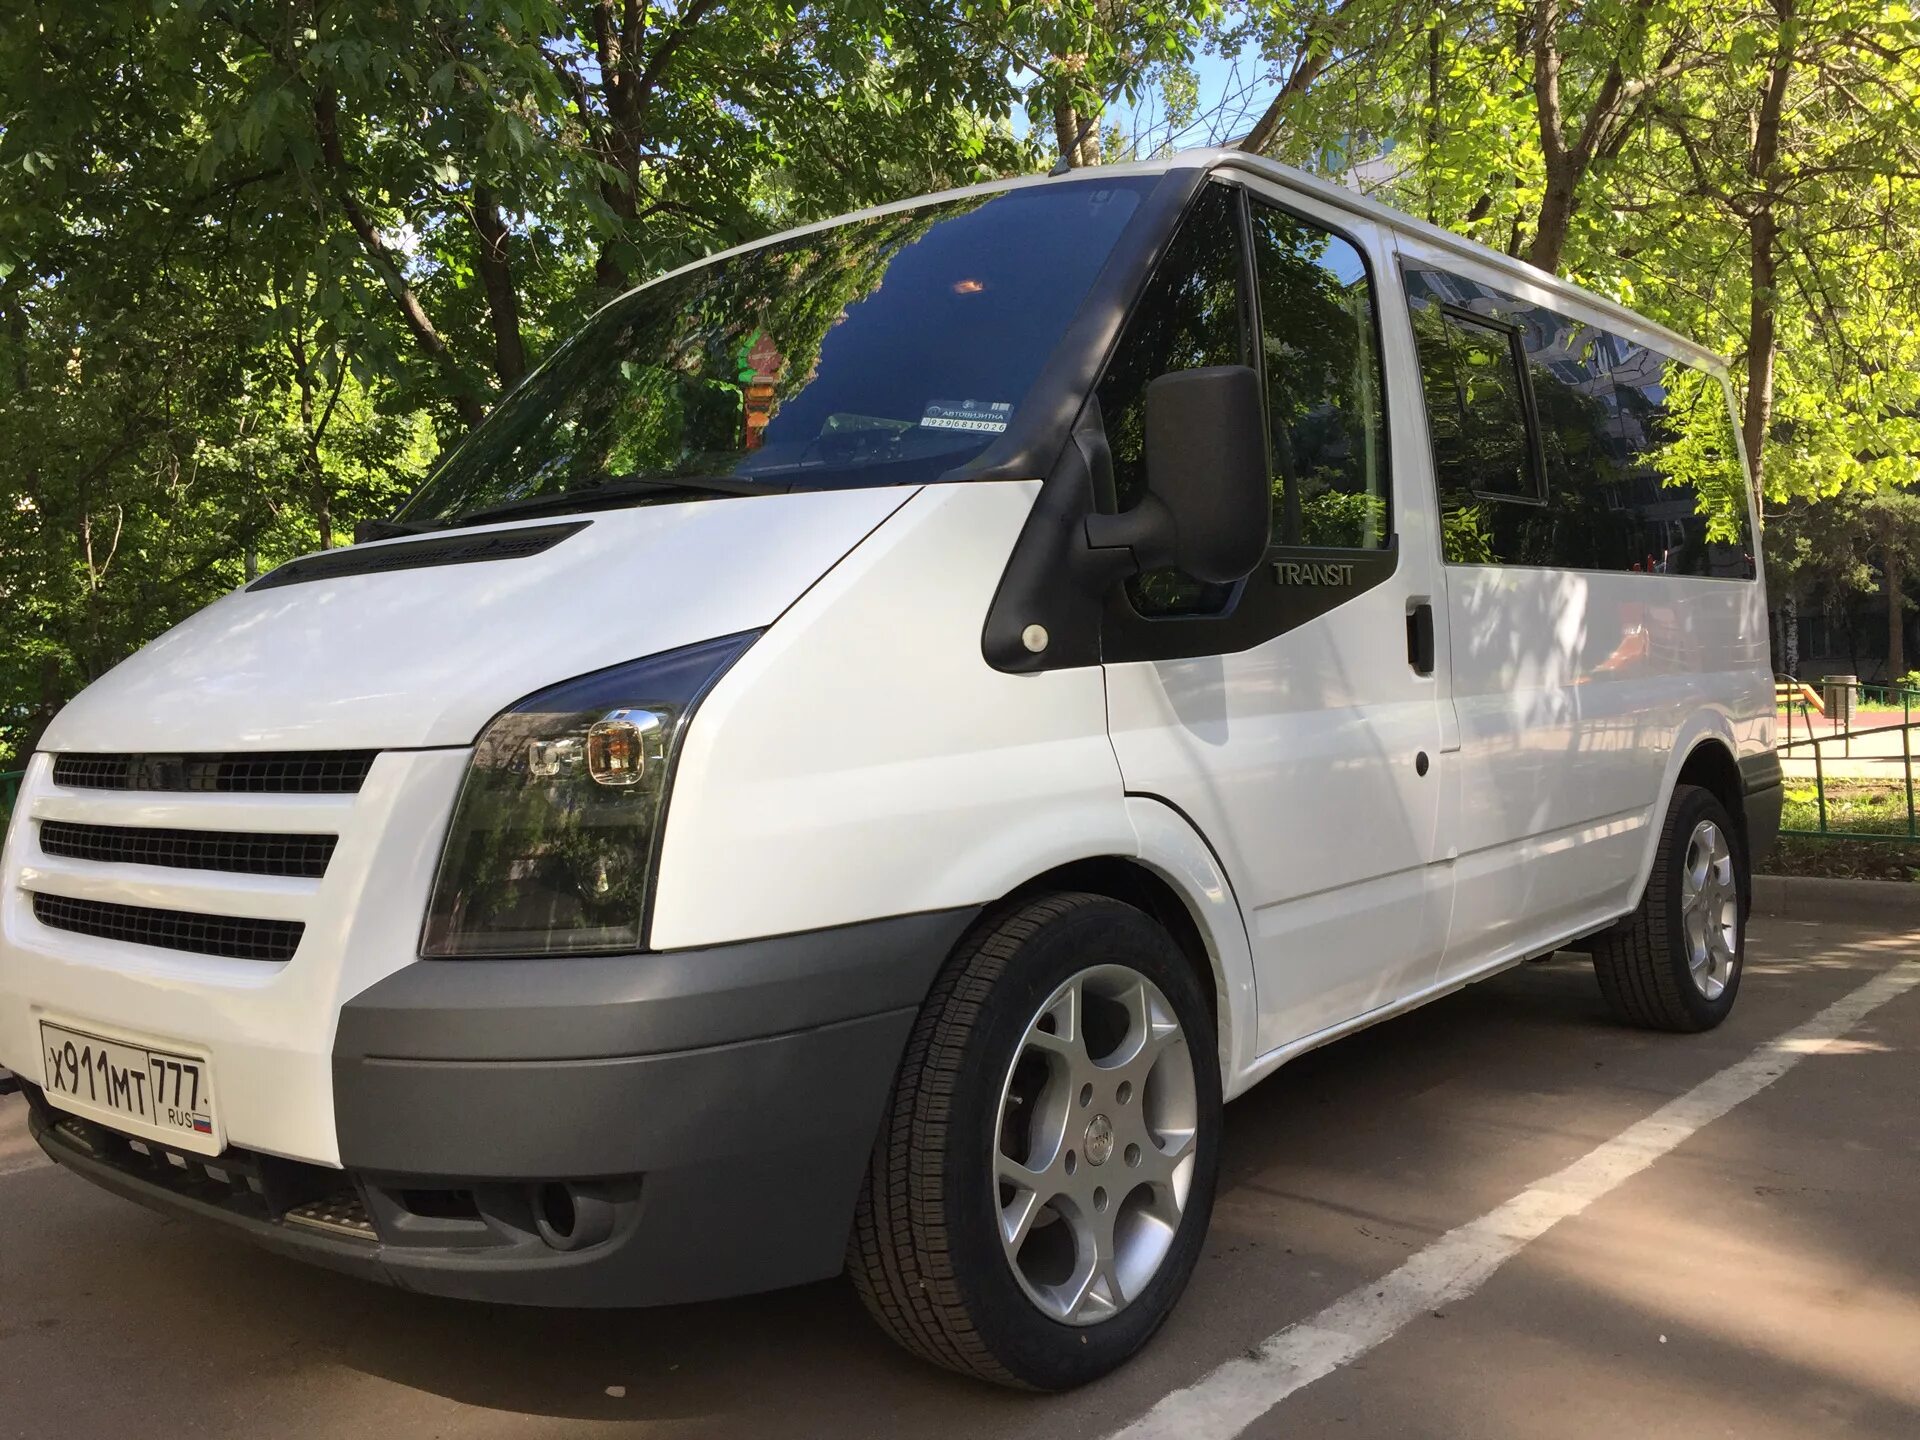 Форд Транзит 2.2 2008. Ford Transit 2.2. Ford Transit 2008. Ford Transit r18. Купить форд дизель б у